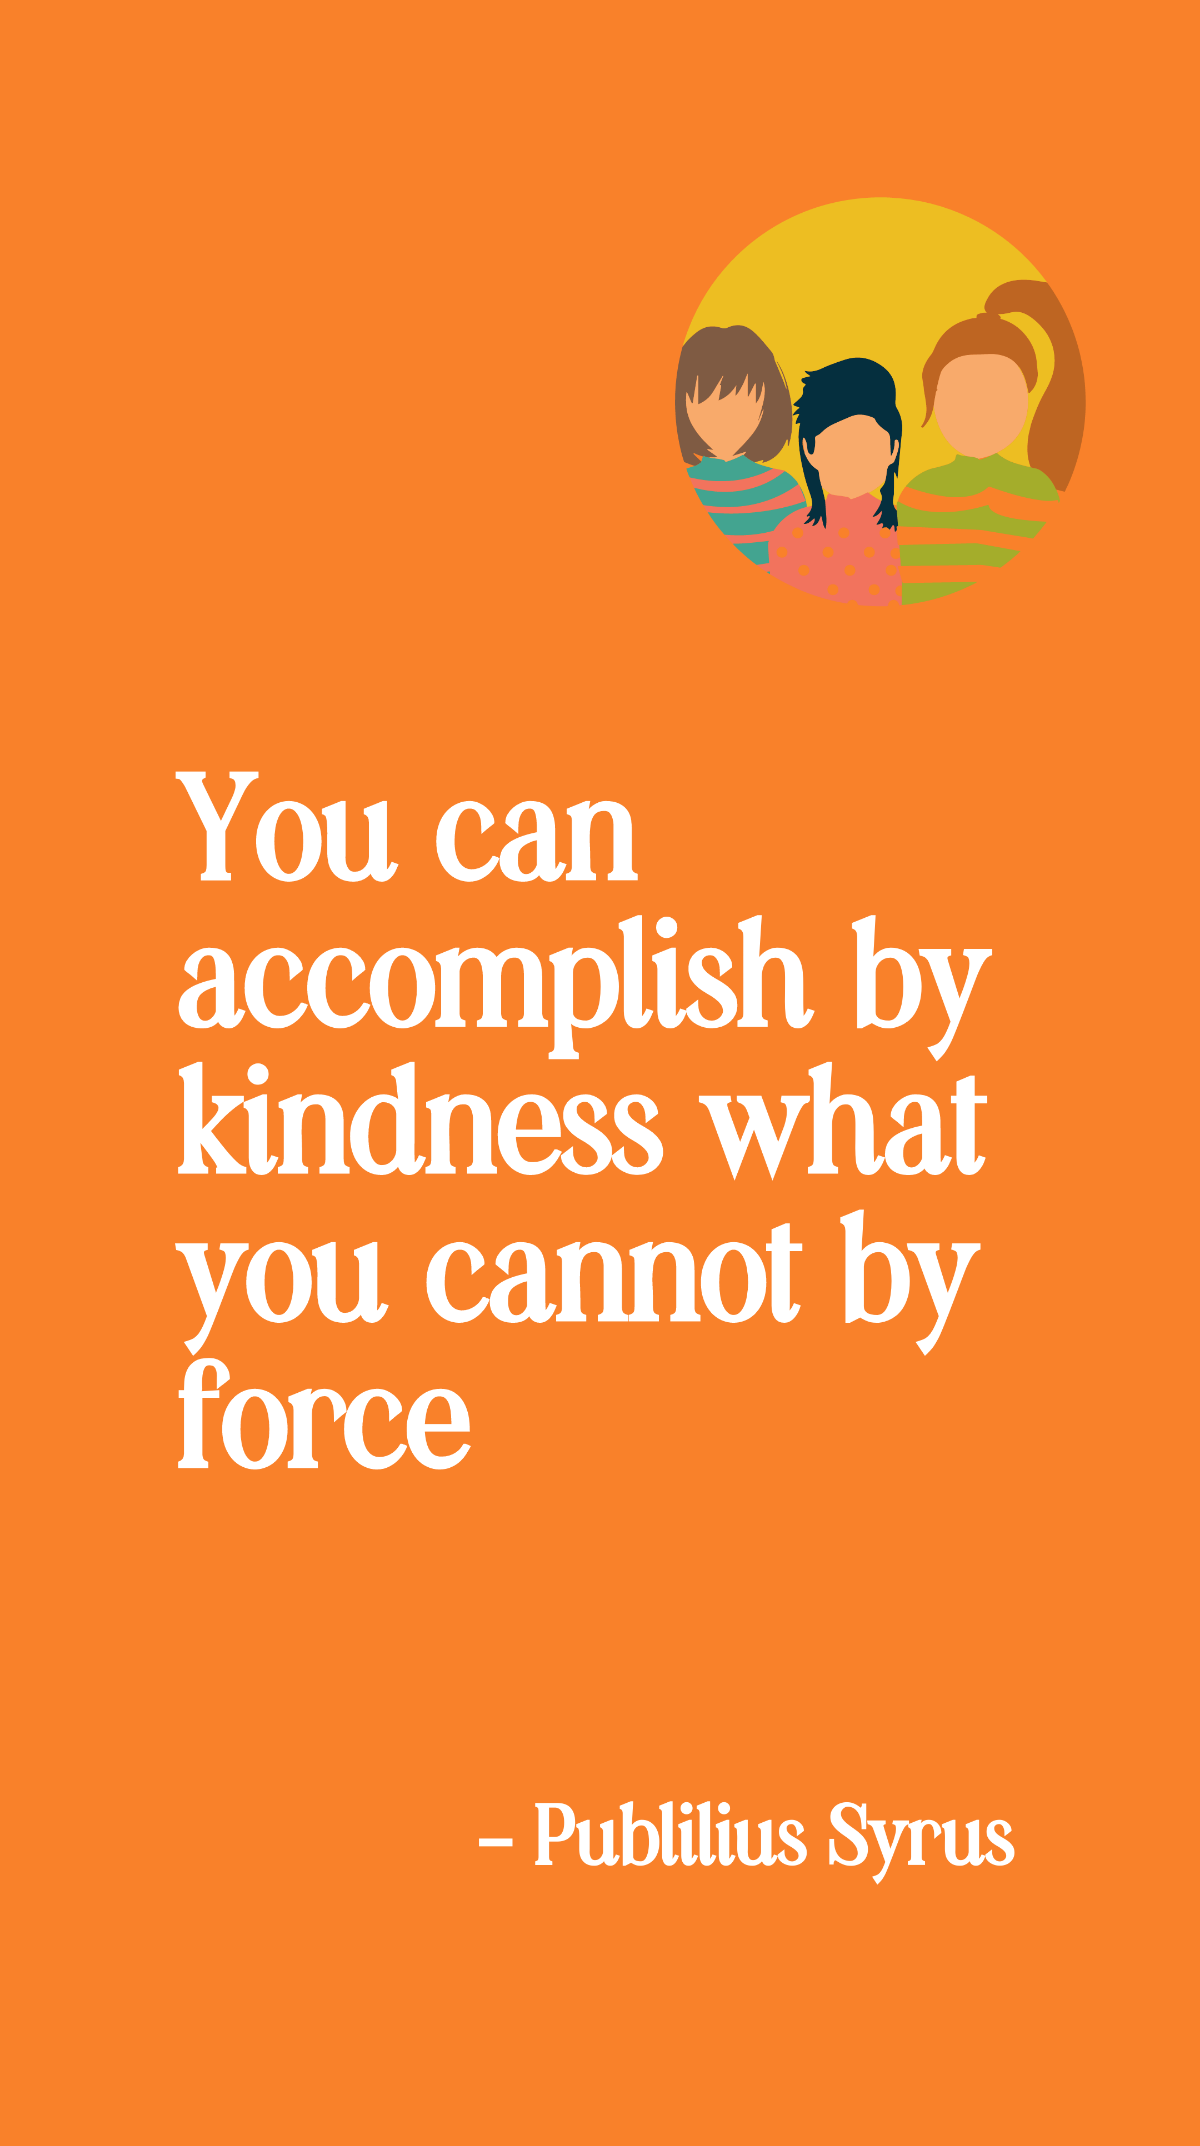 Publilius Syrus - You can accomplish by kindness what you cannot by force Template